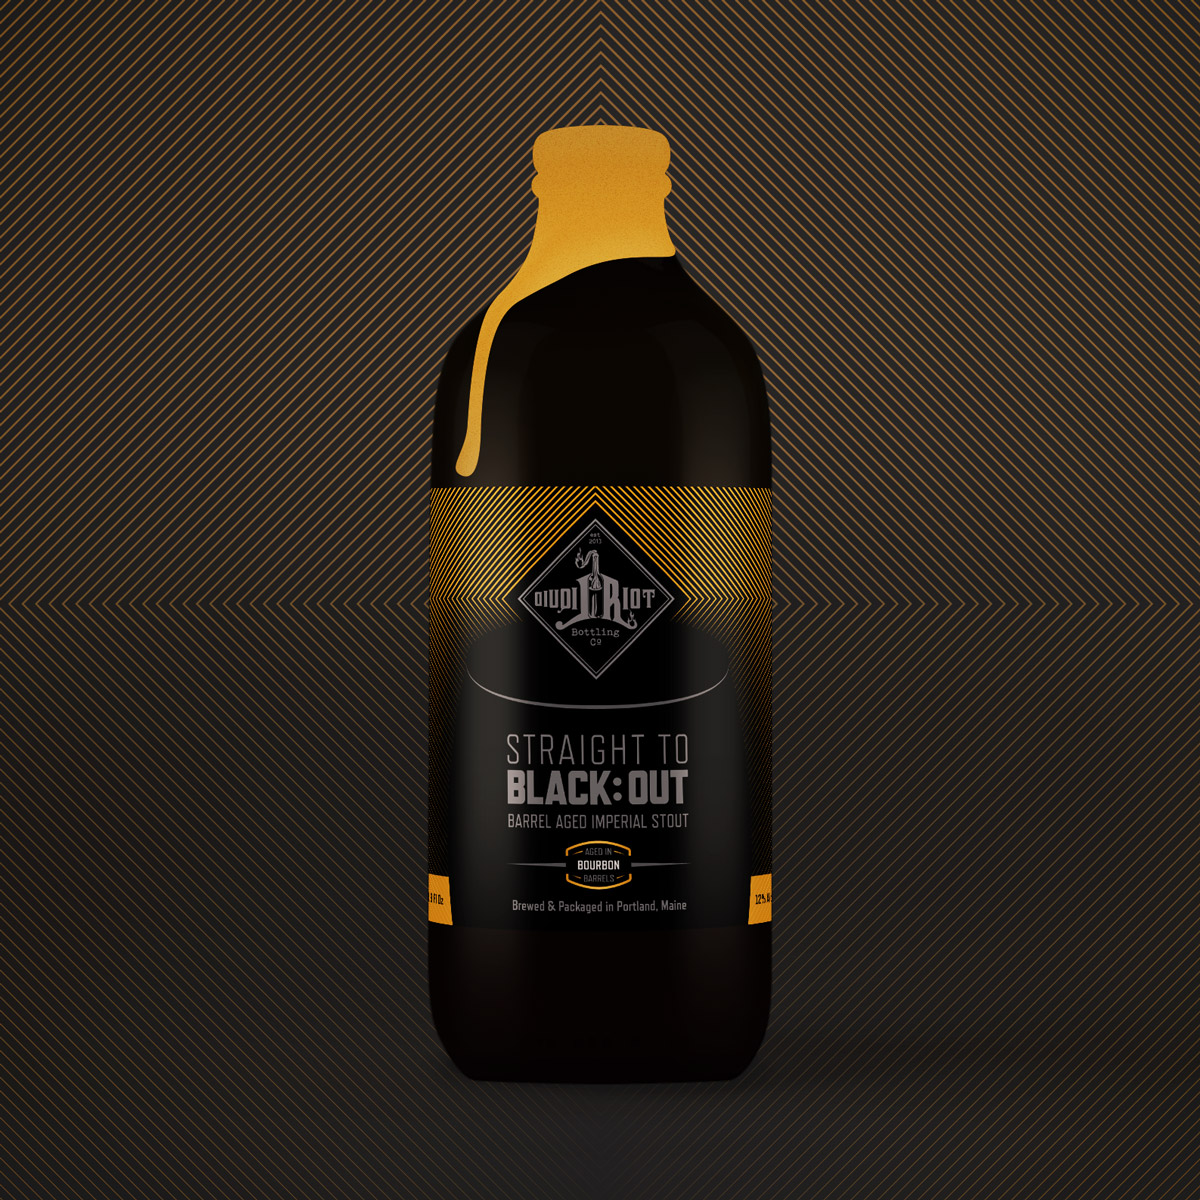 Liquid Riot – Straight to Black:Out – Bourbon